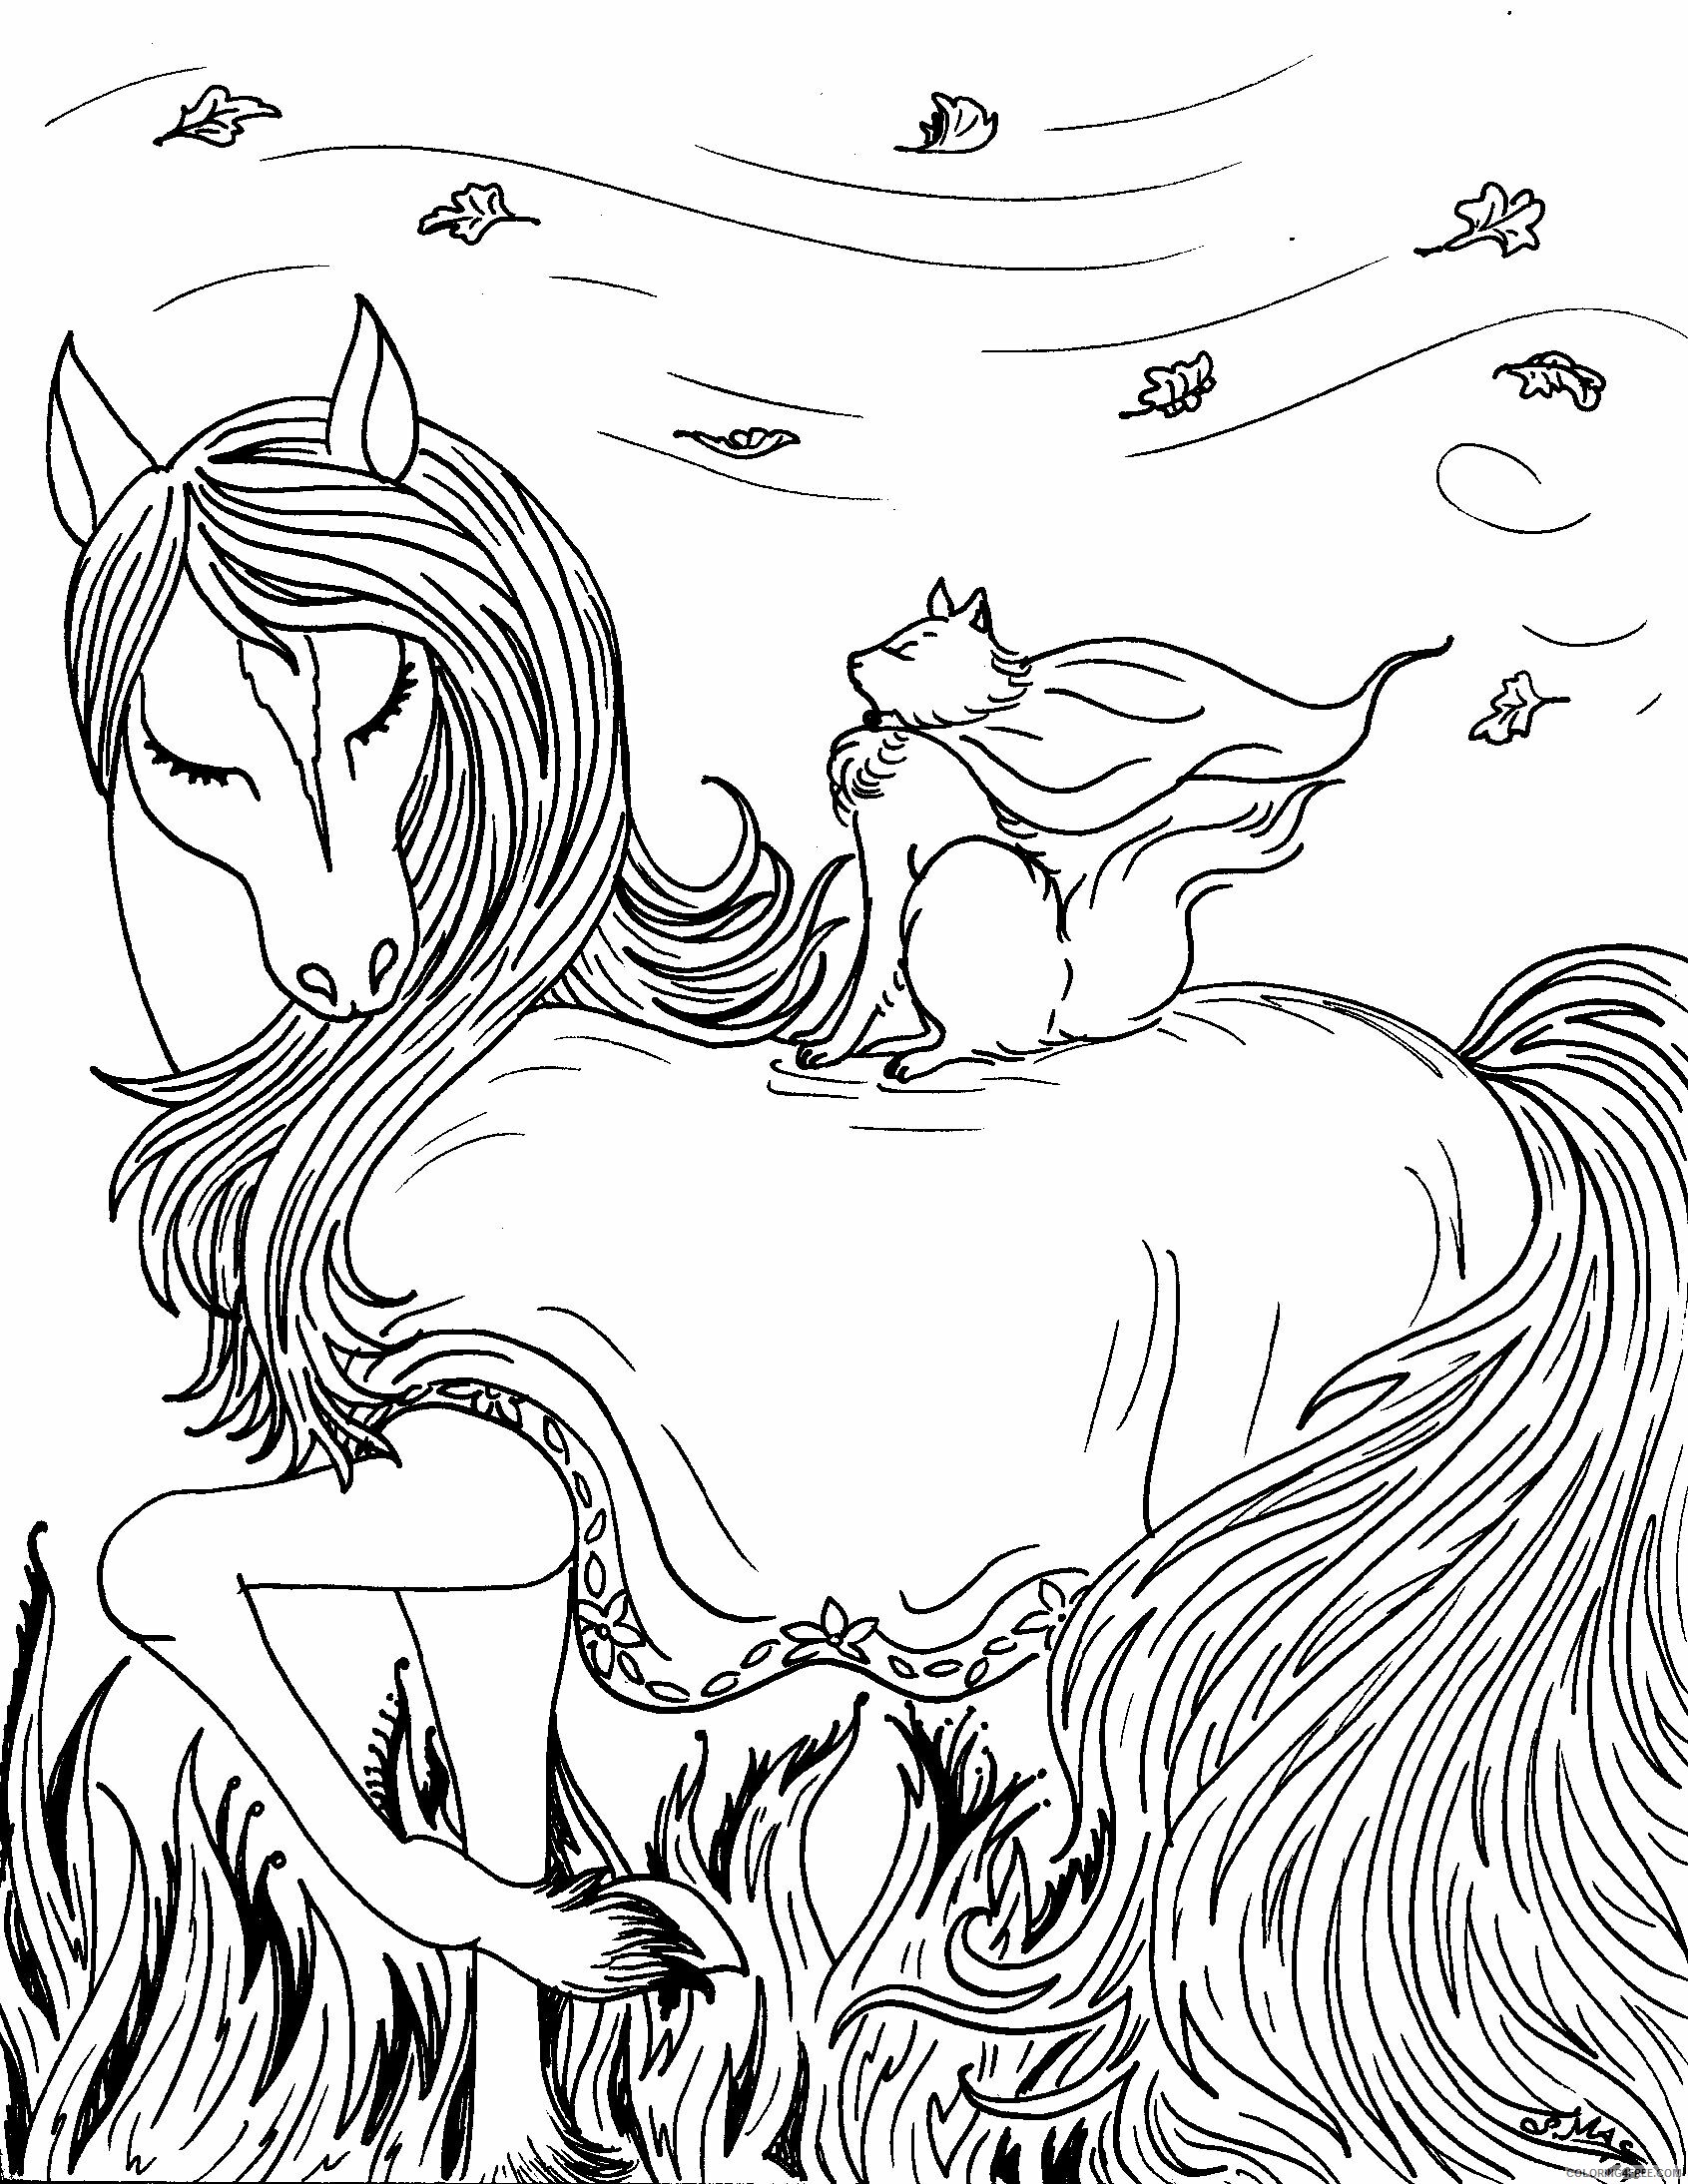 Horses Coloring Pages Animal Printable Sheets pretty horse fantasy 2021 2803 Coloring4free